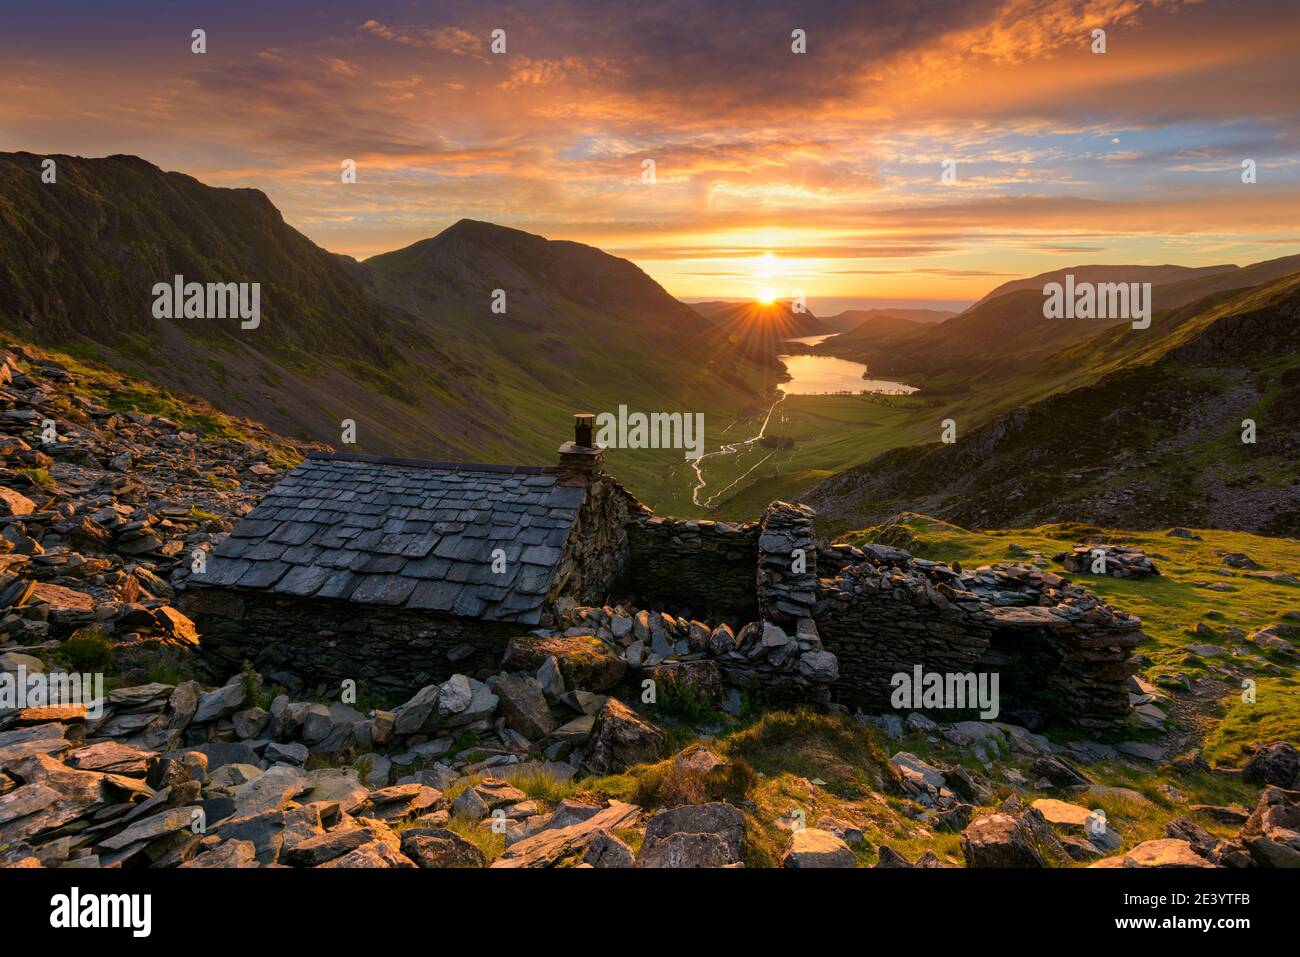 Old mountain shelter Warnscale Bothy with beautiful sunset over Buttermere in the Lake District, UK. Stock Photo